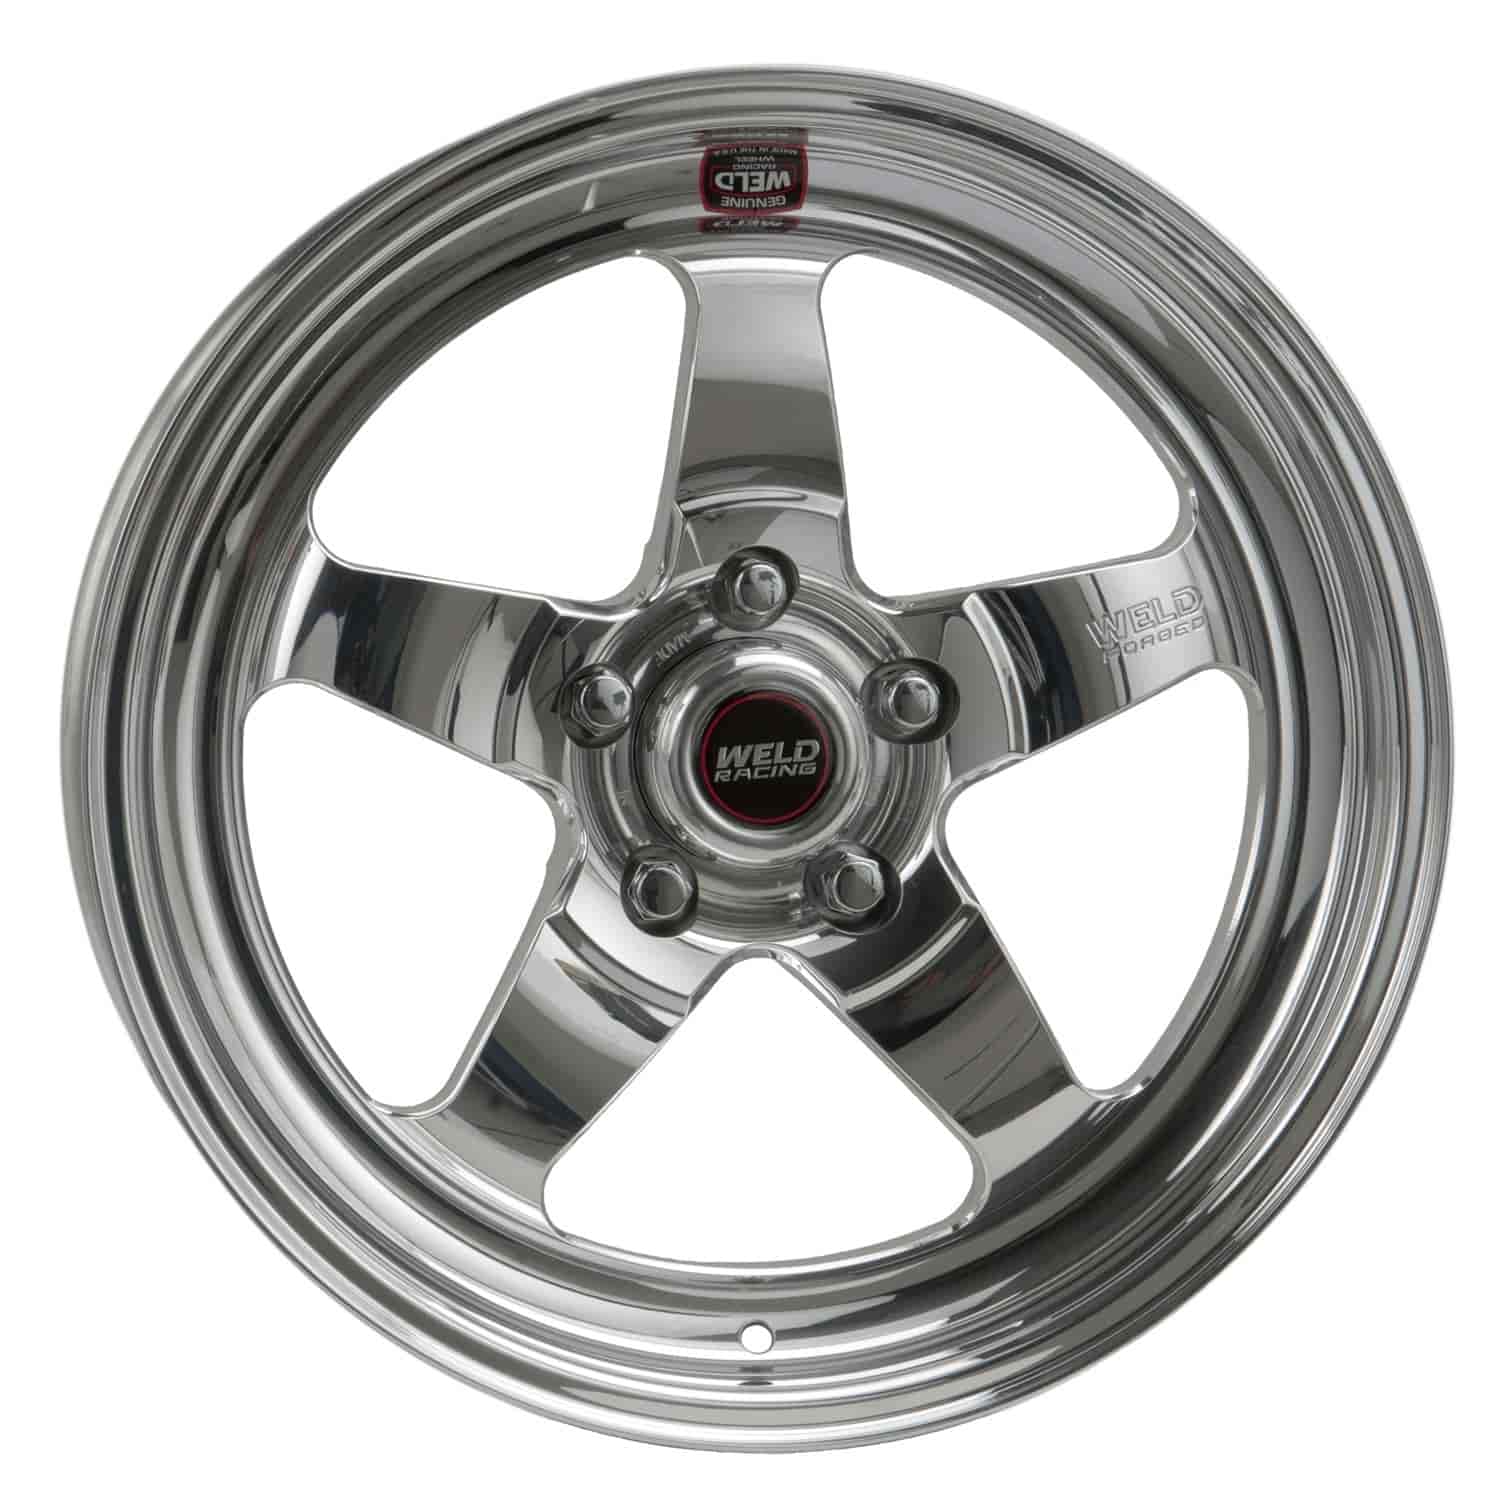 RT-S Series Wheel Size: 15" x 7" Bolt Circle: 5 x 4-3/4" Back Space: 4-1/2"